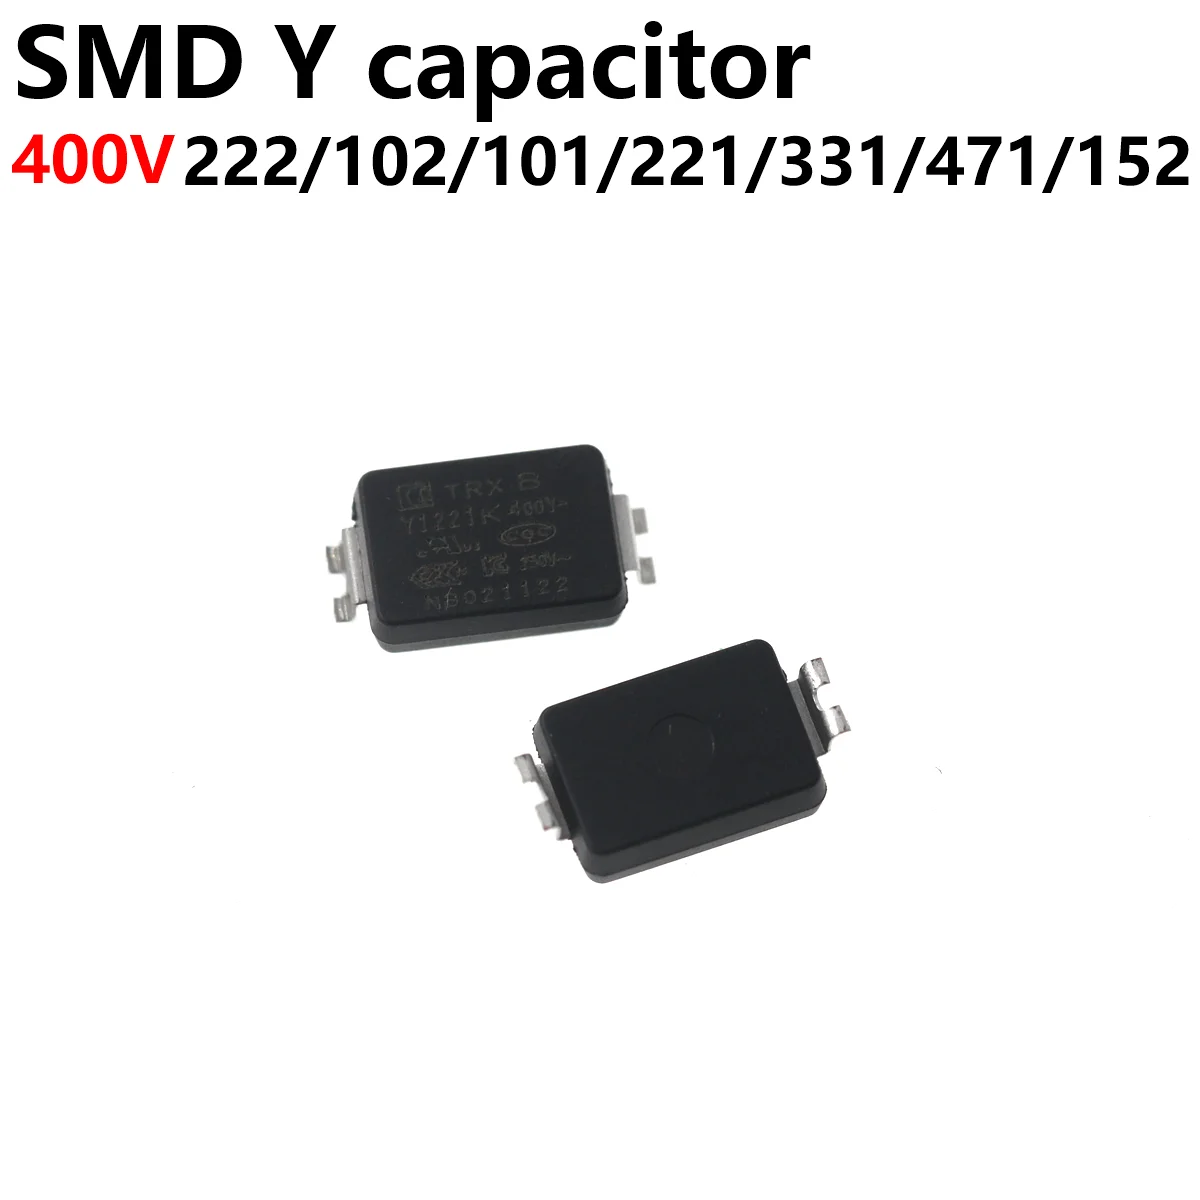 50PCS SMD Safety Regulation Y Capacitor Y1 TMY1222M 400V 222M 102M 101K 221K 331K 471K 681K 152M 332M 472M 103M 300V 20pcs 250v safety capacitor x1y2 capacitor 1 5nf 2 2nf 3 3nf 4 7nf 152m 222m 332m 472m